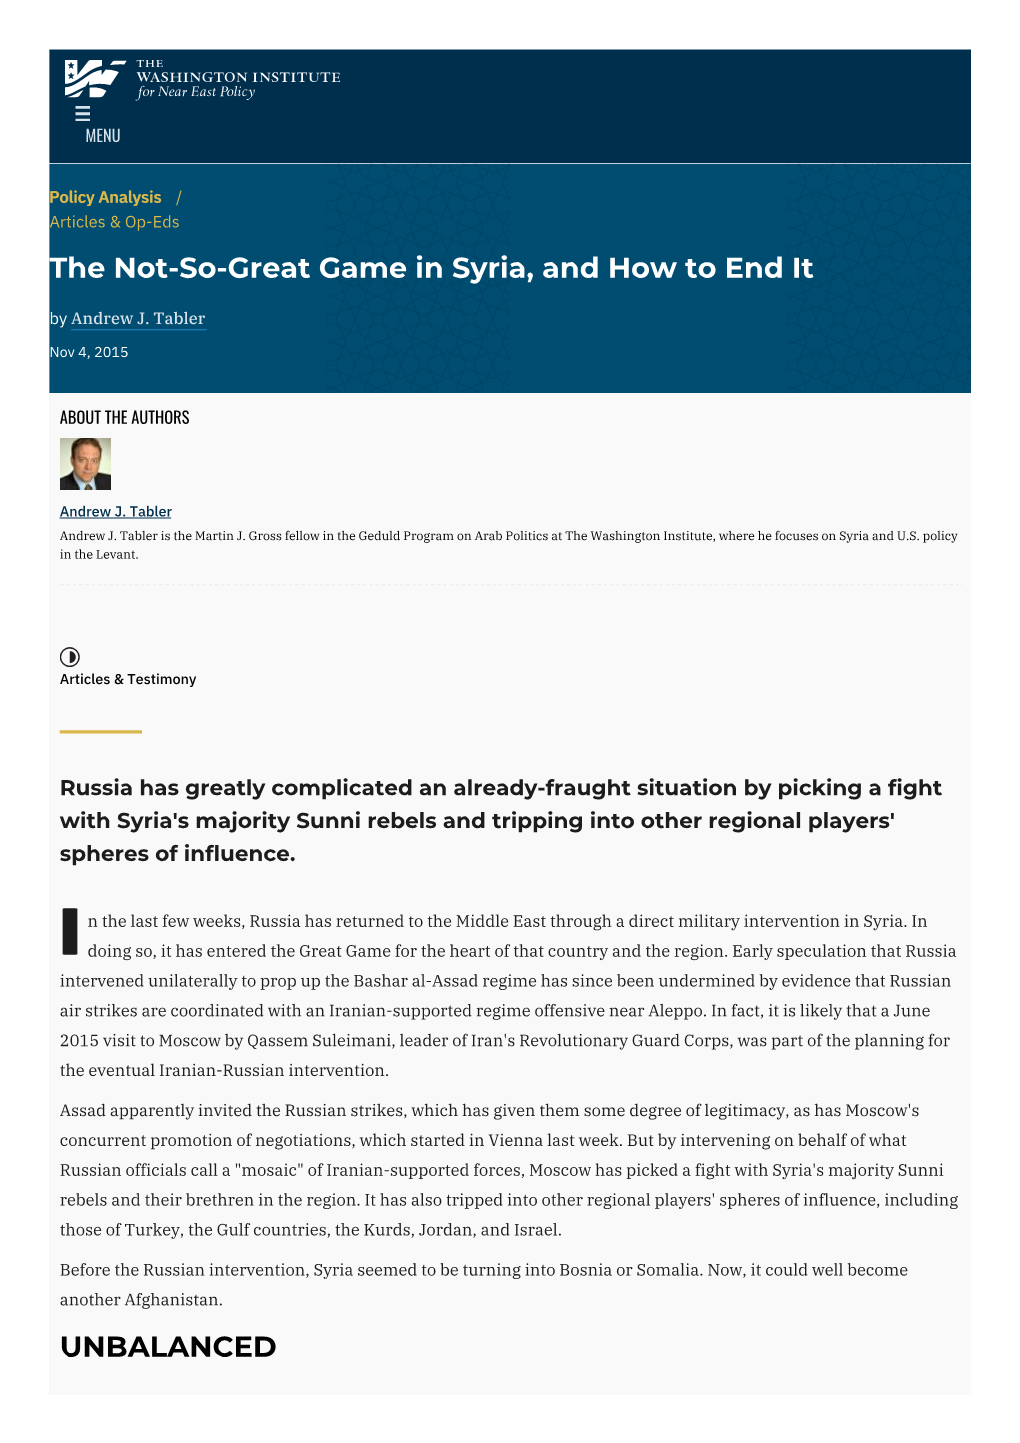 The Not-So-Great Game in Syria, and How to End It by Andrew J